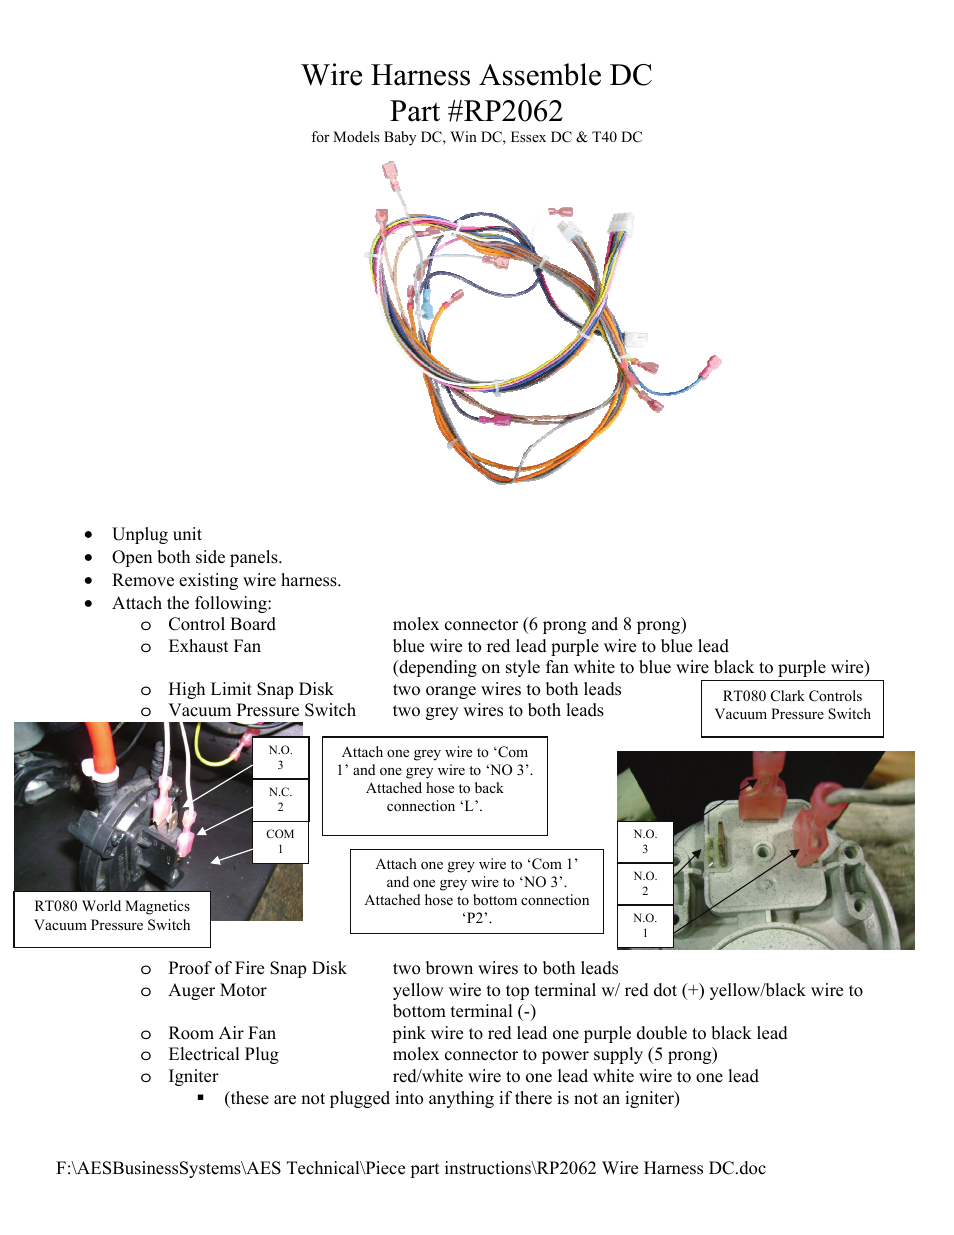 RP2062 DC Wire Harness